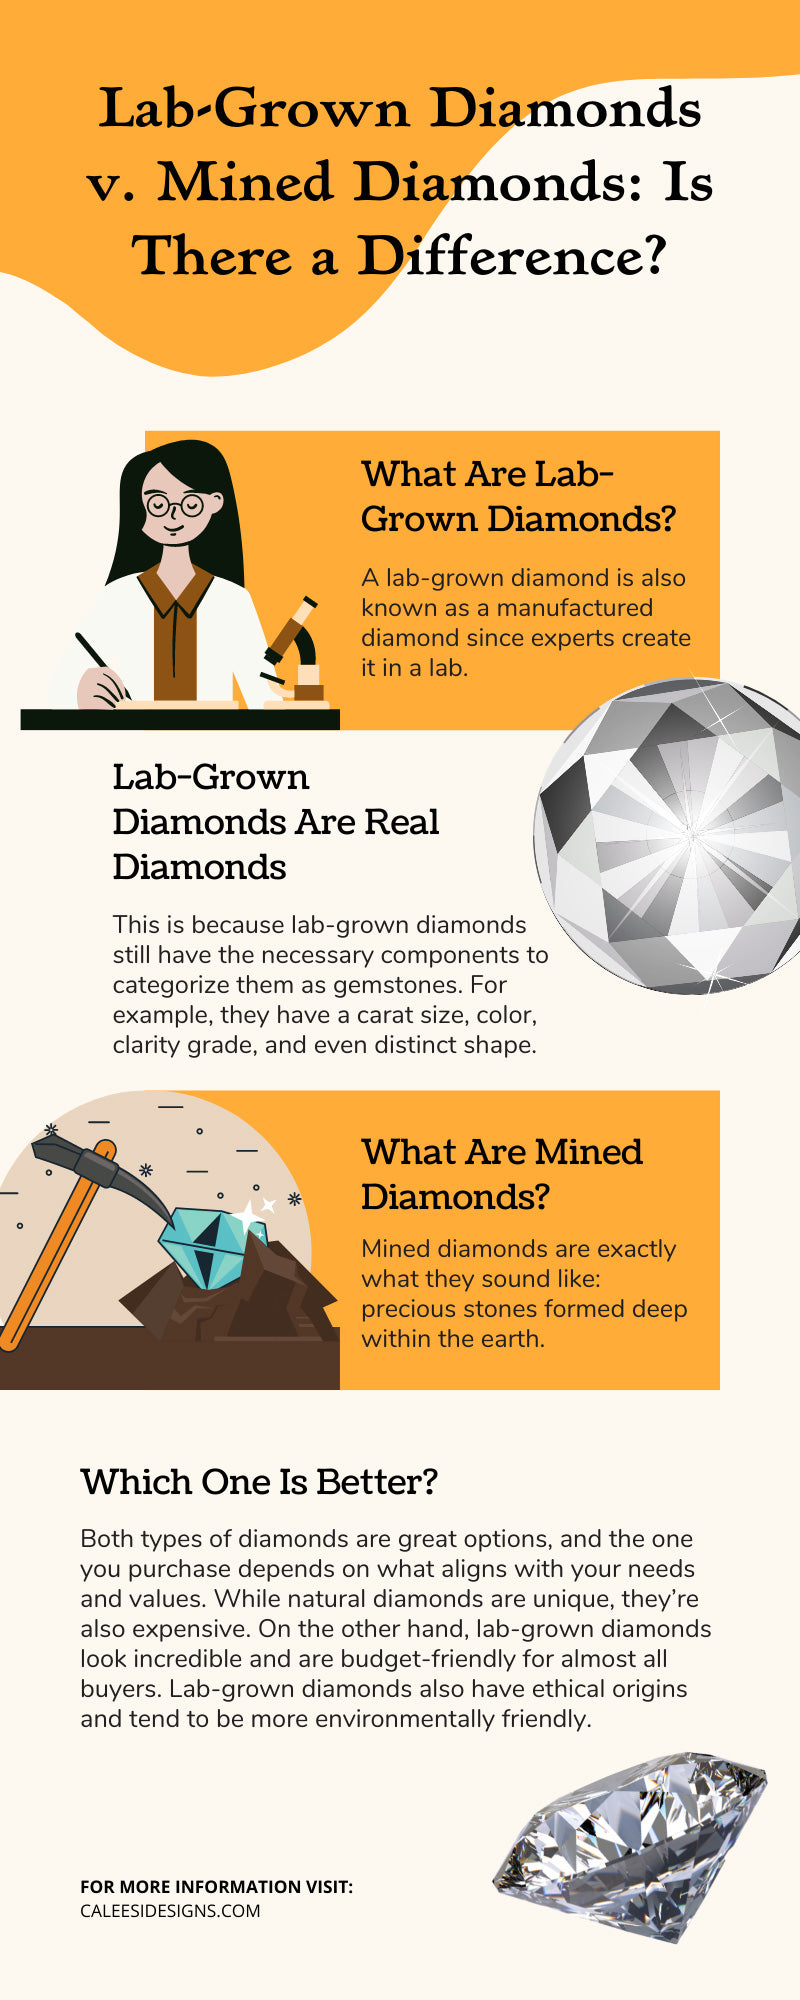 Lab-Grown Diamonds v. Mined Diamonds: Is There a Difference?